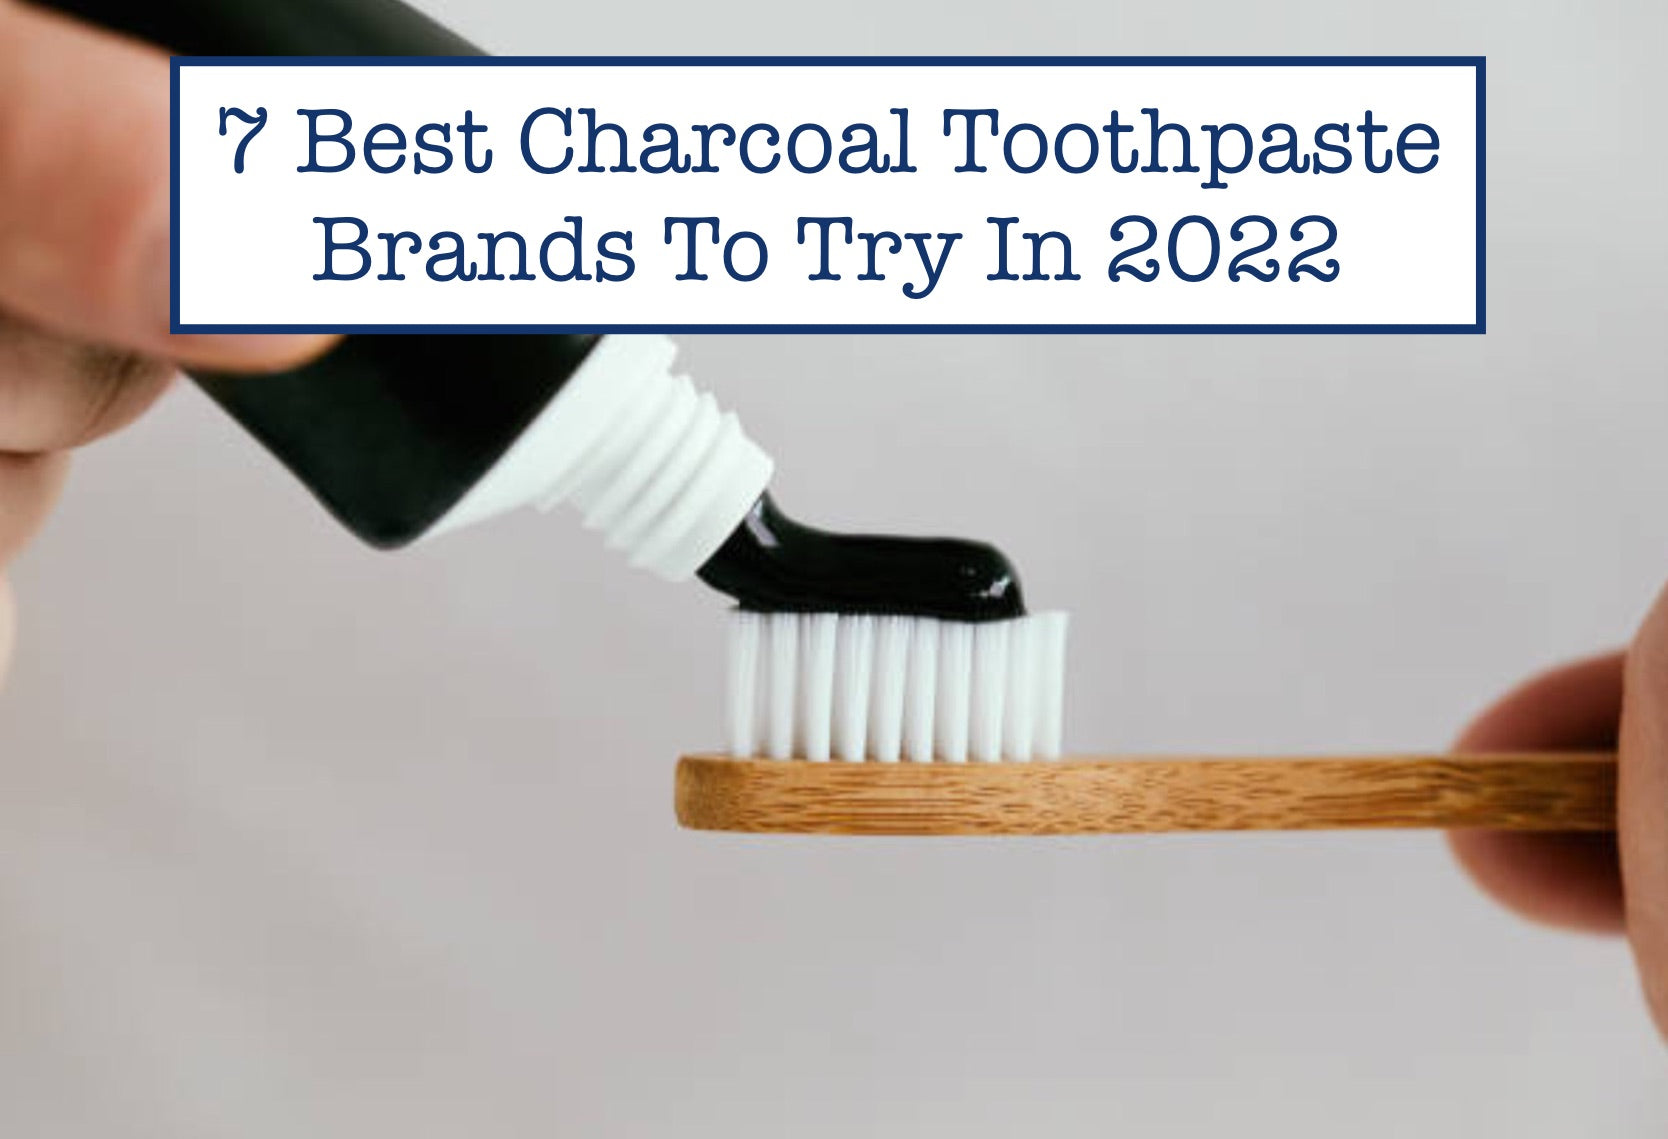 7 Best Charcoal Toothpaste Brands To Try In 2022